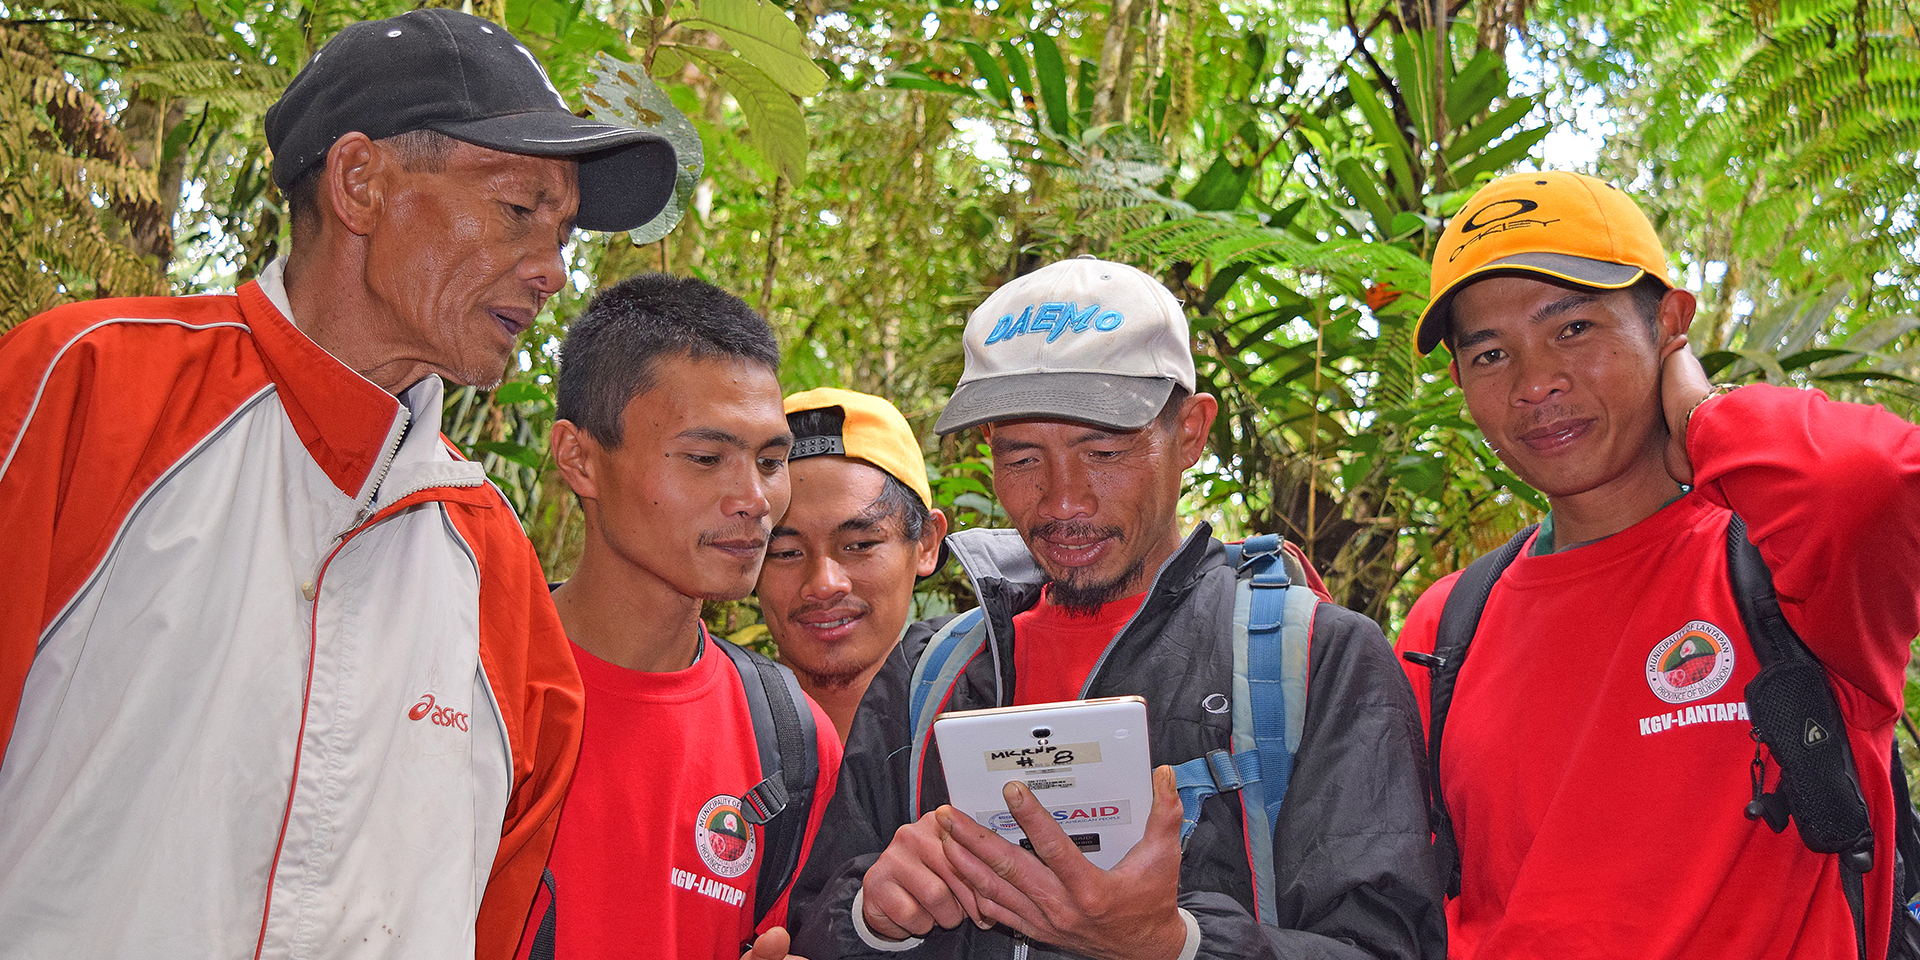 A man showing a tablet he is holding to four other men standing alongside him. They are in a green forest.